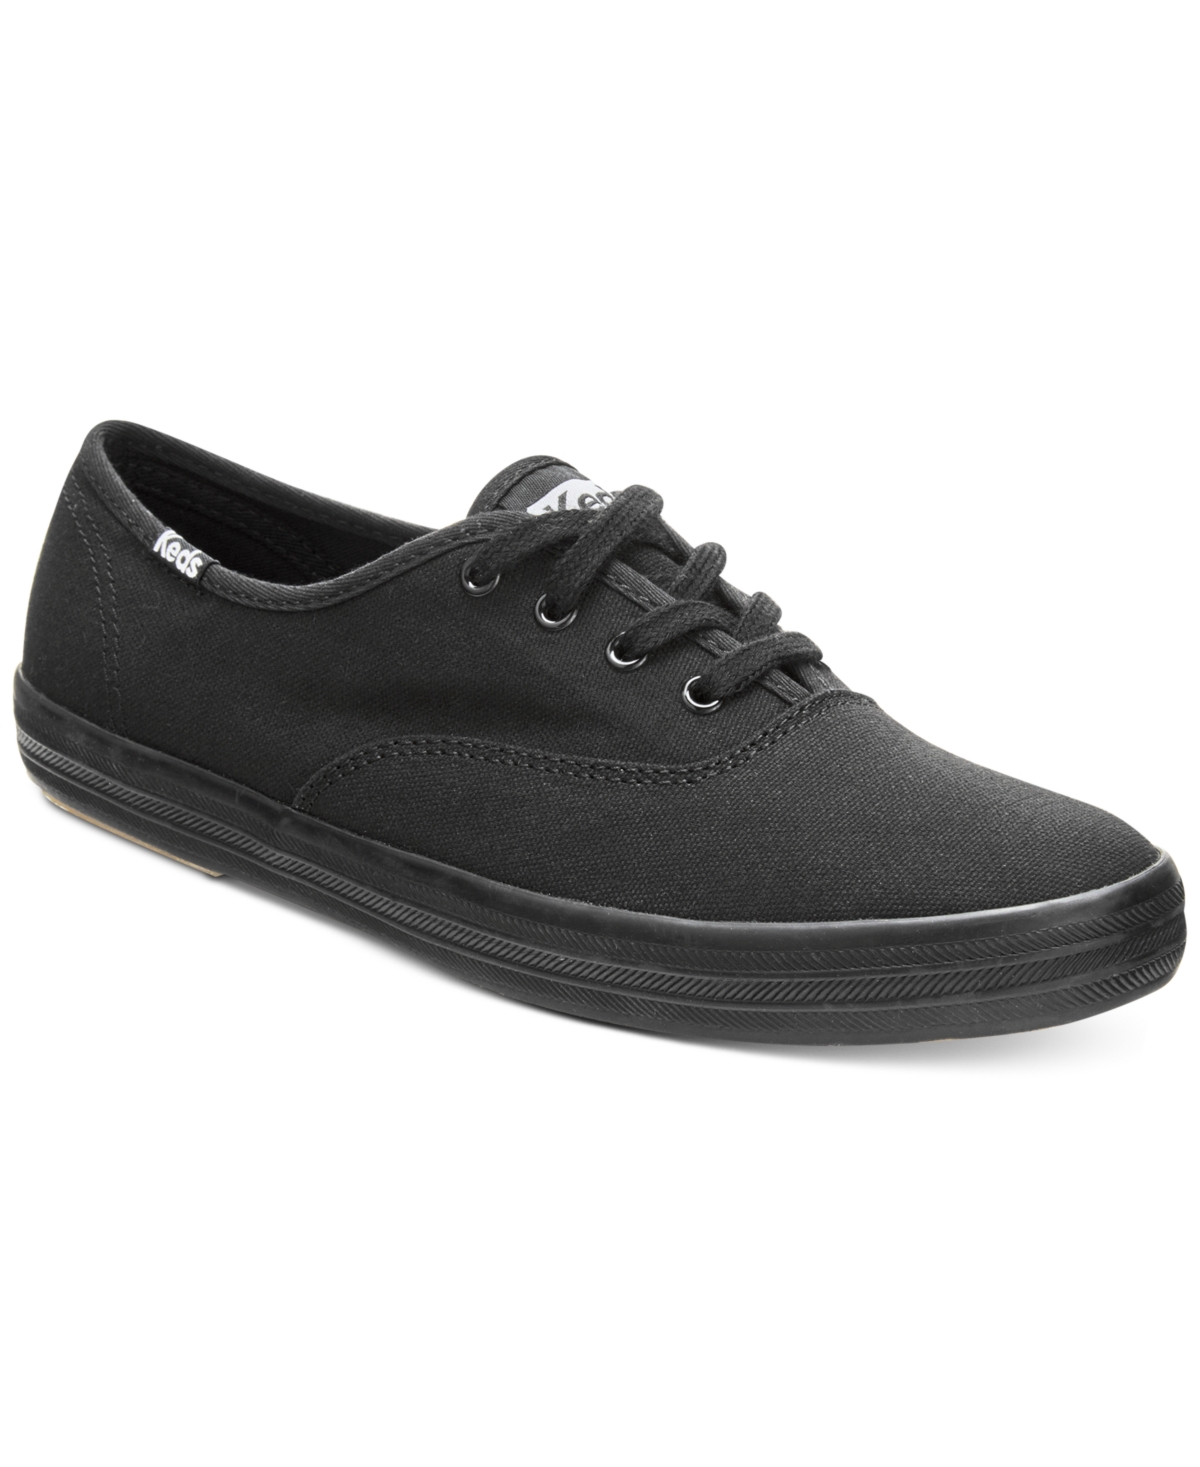 UPC 044208122744 product image for Keds Women's Champion Ortholite Lace-Up Oxford Fashion Sneakers from Finish Line | upcitemdb.com